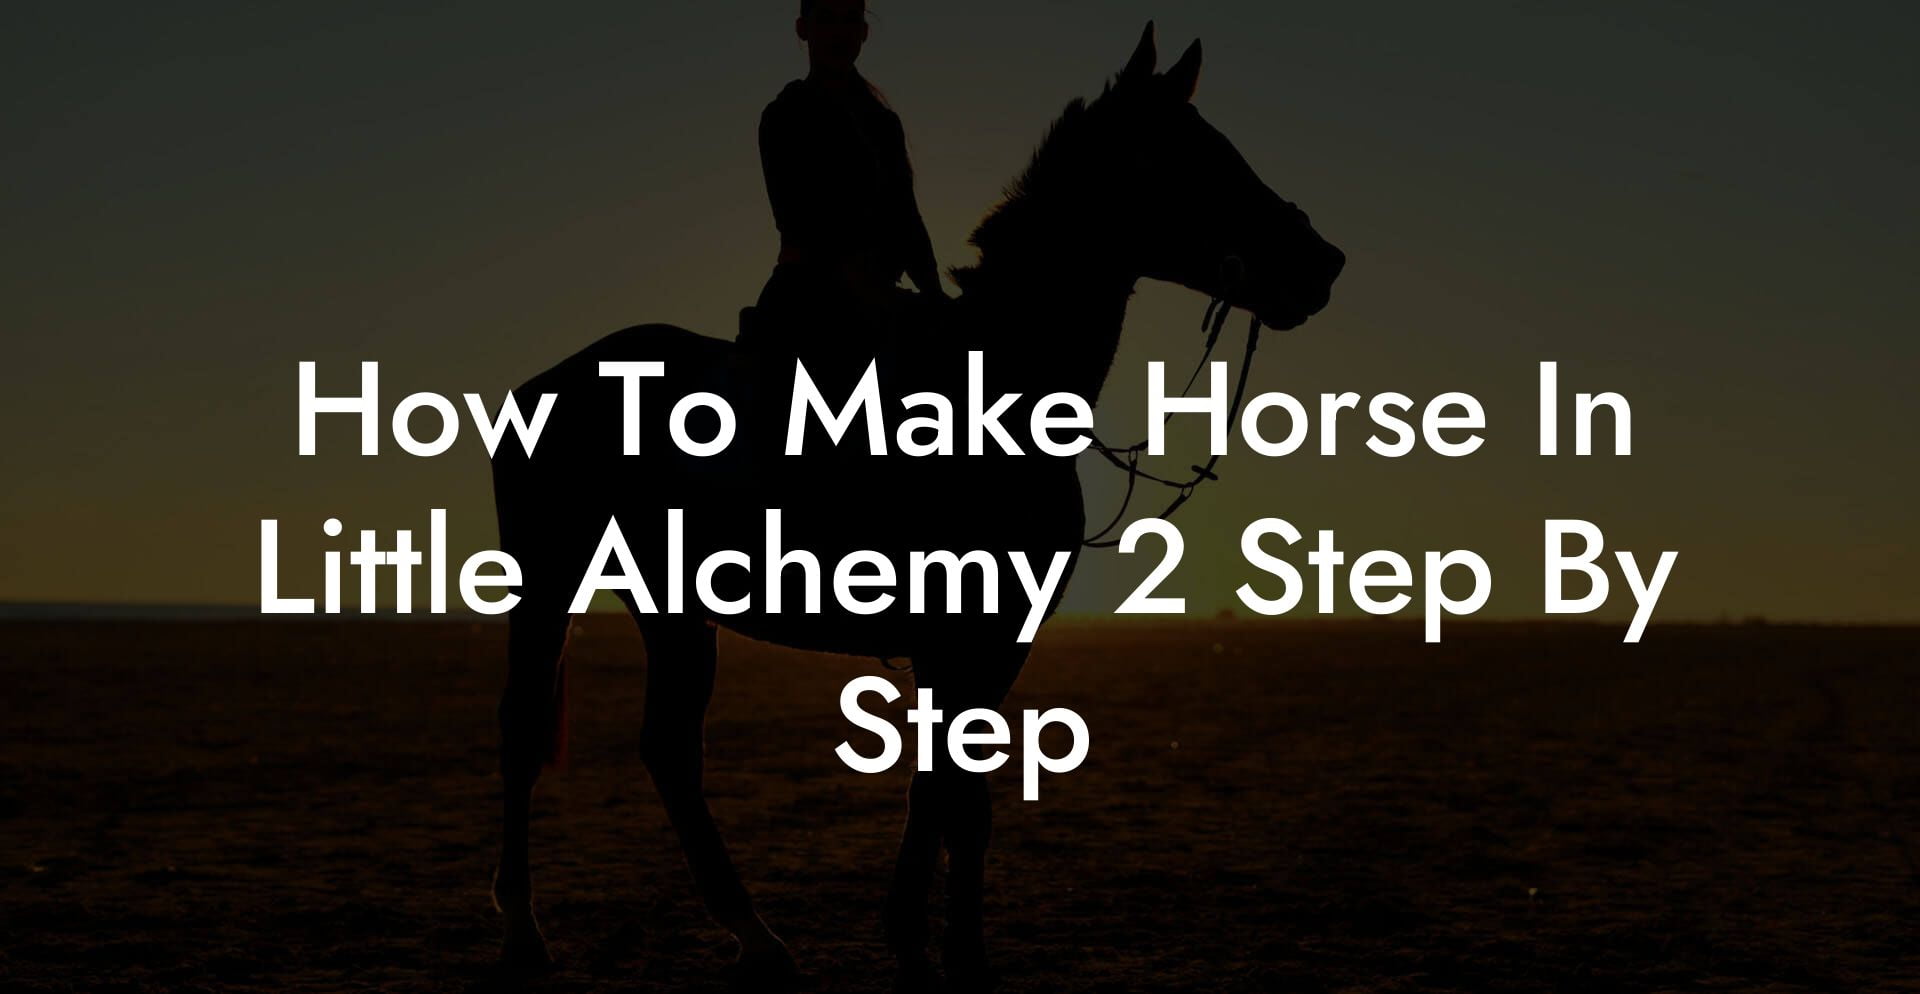 How To Make Horse In Little Alchemy 2 Step By Step